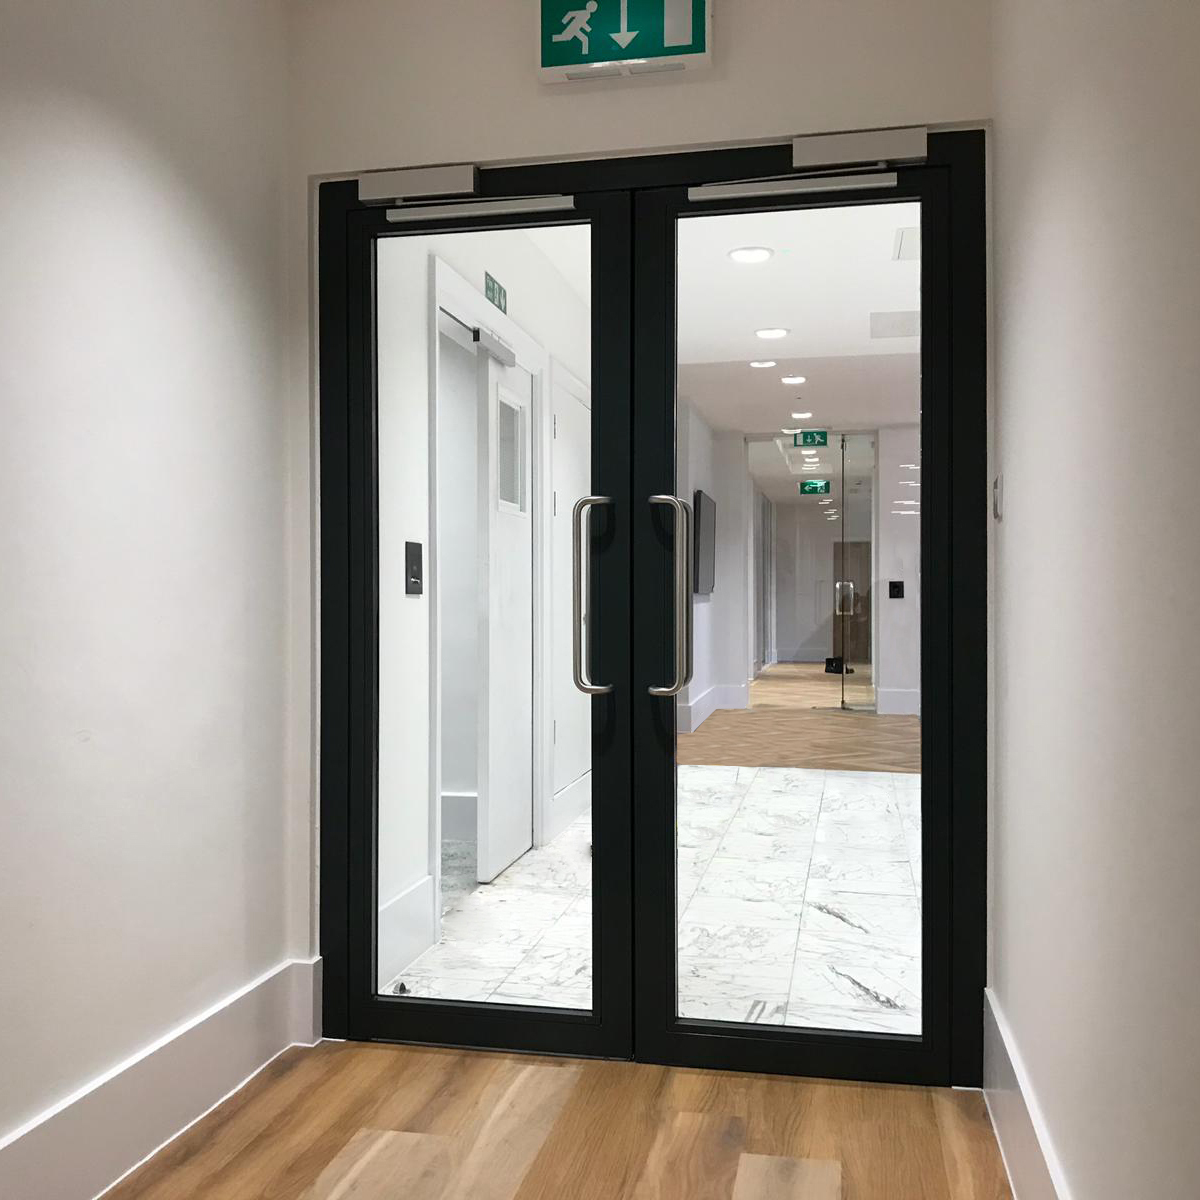 The Function and Principle of Fire-resistant Glass Door